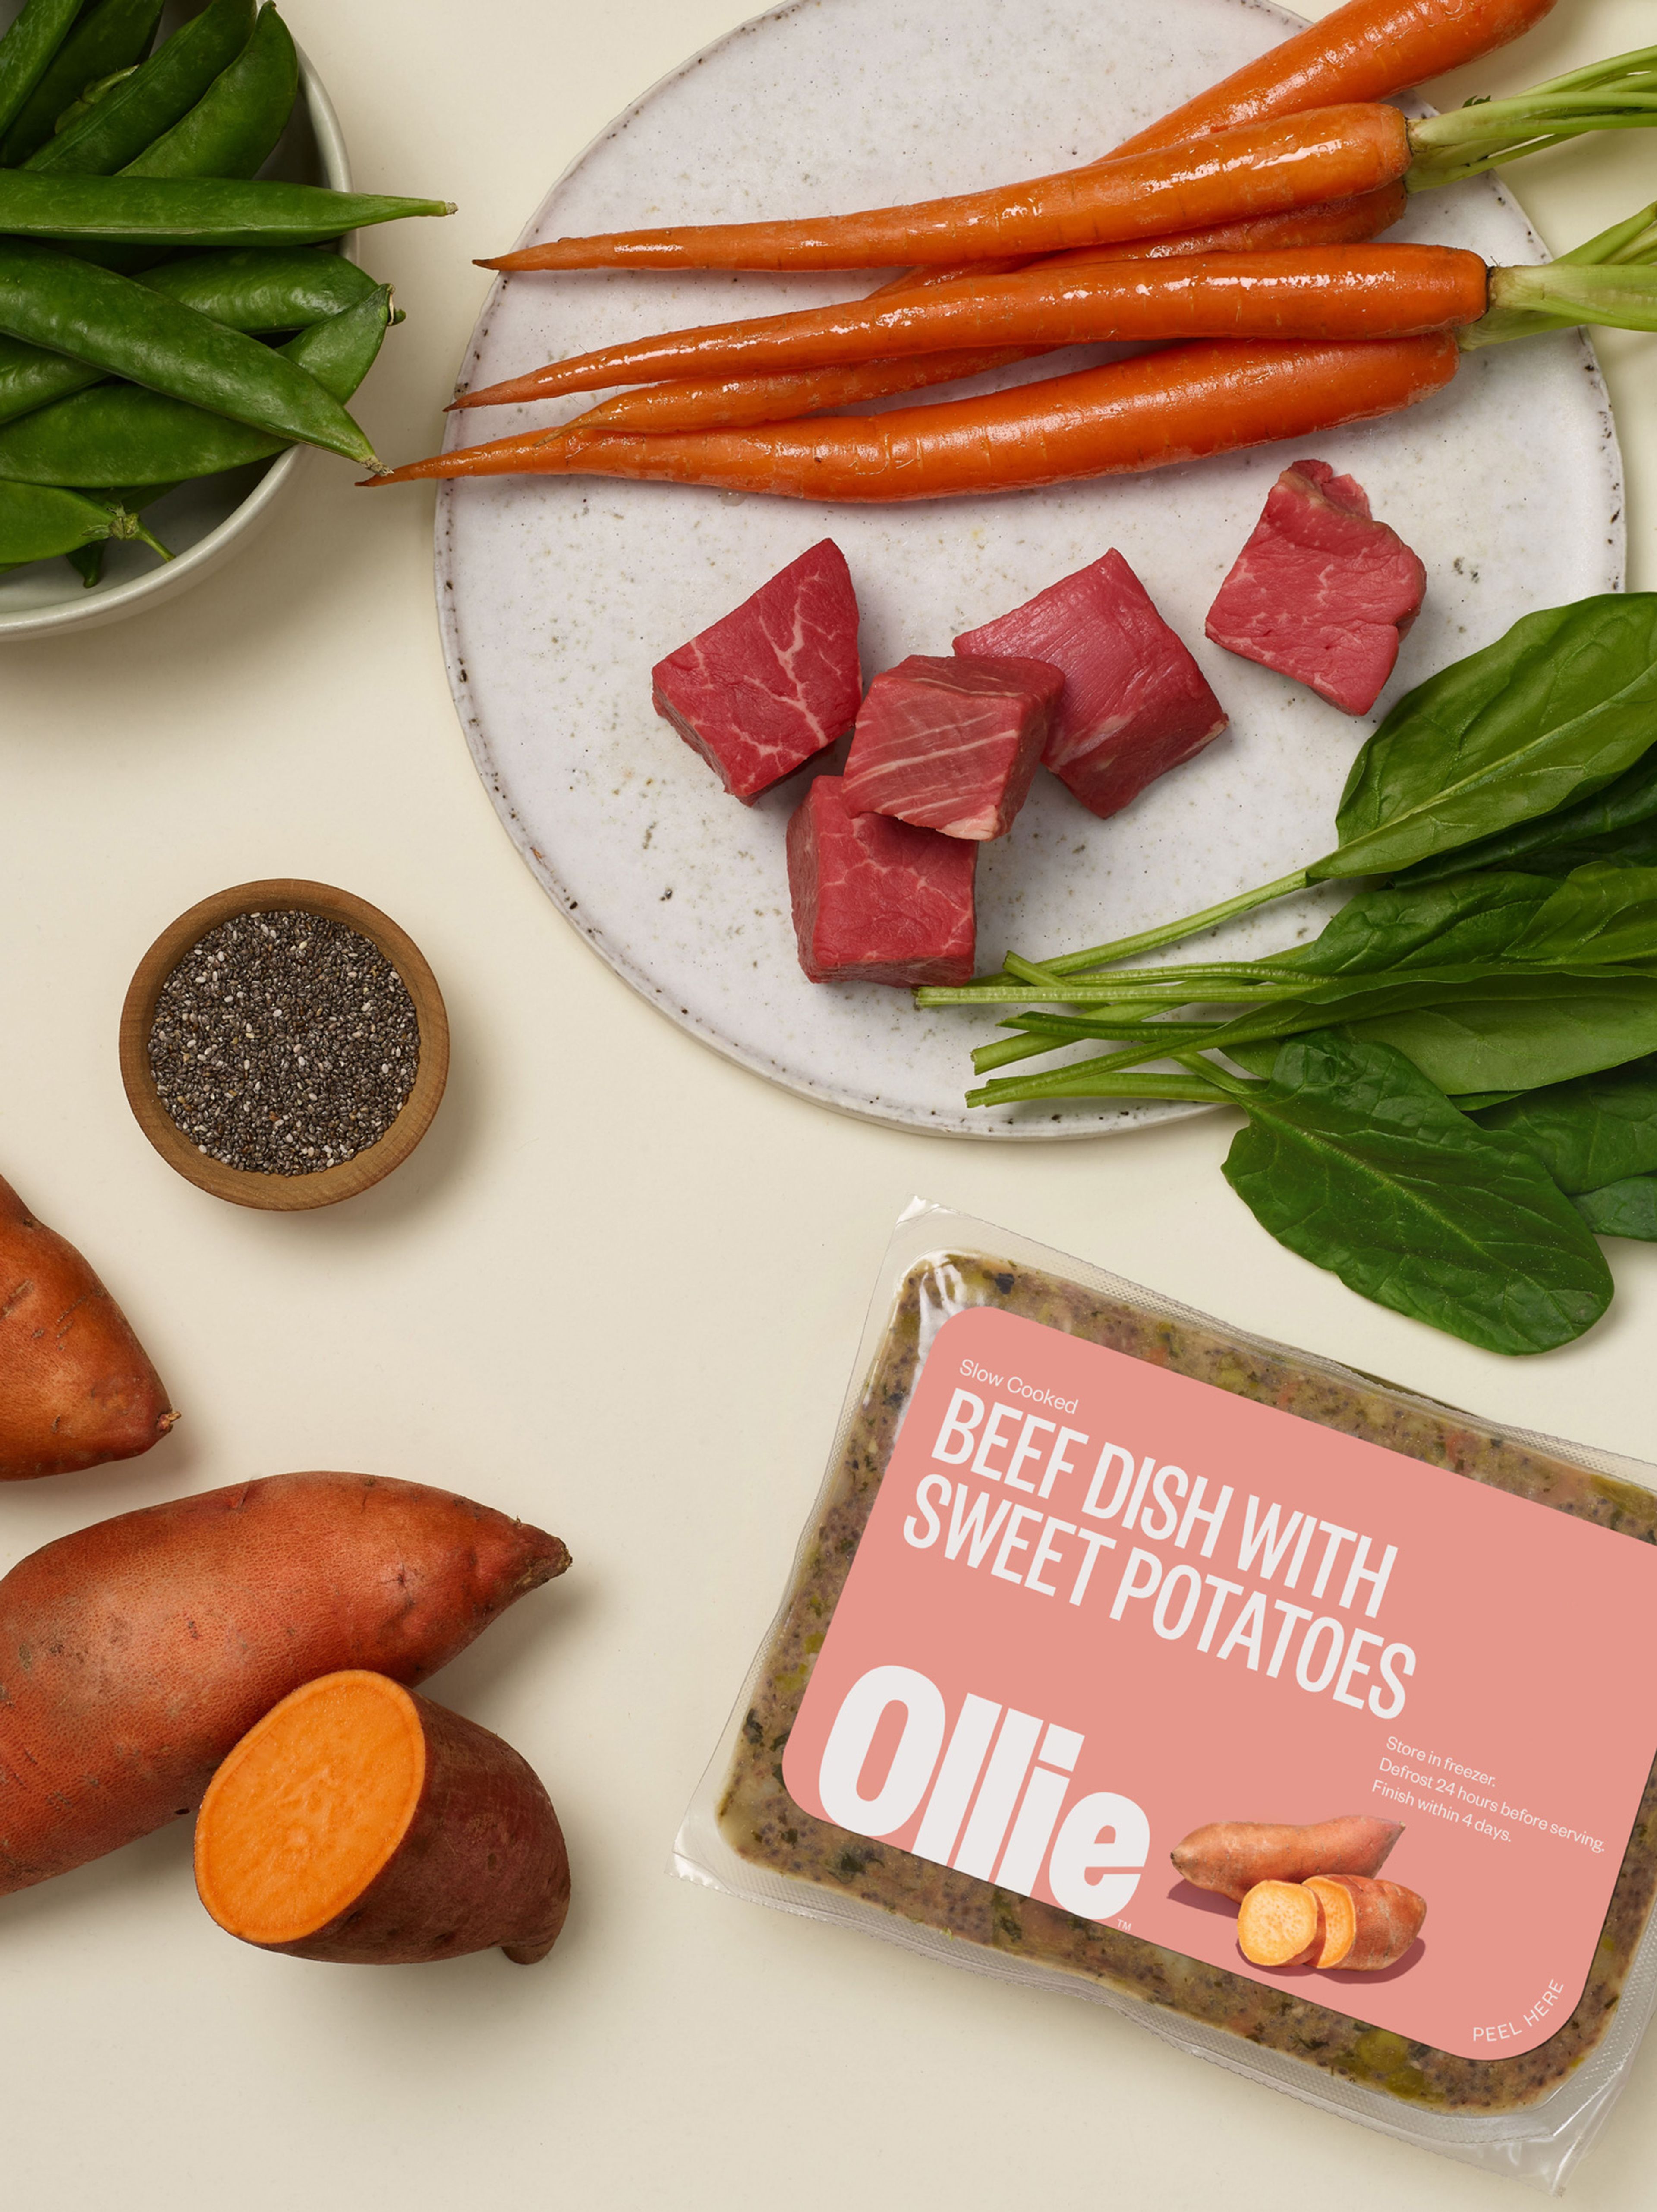 Pack of Ollie's fresh beef recipe next to ingredients